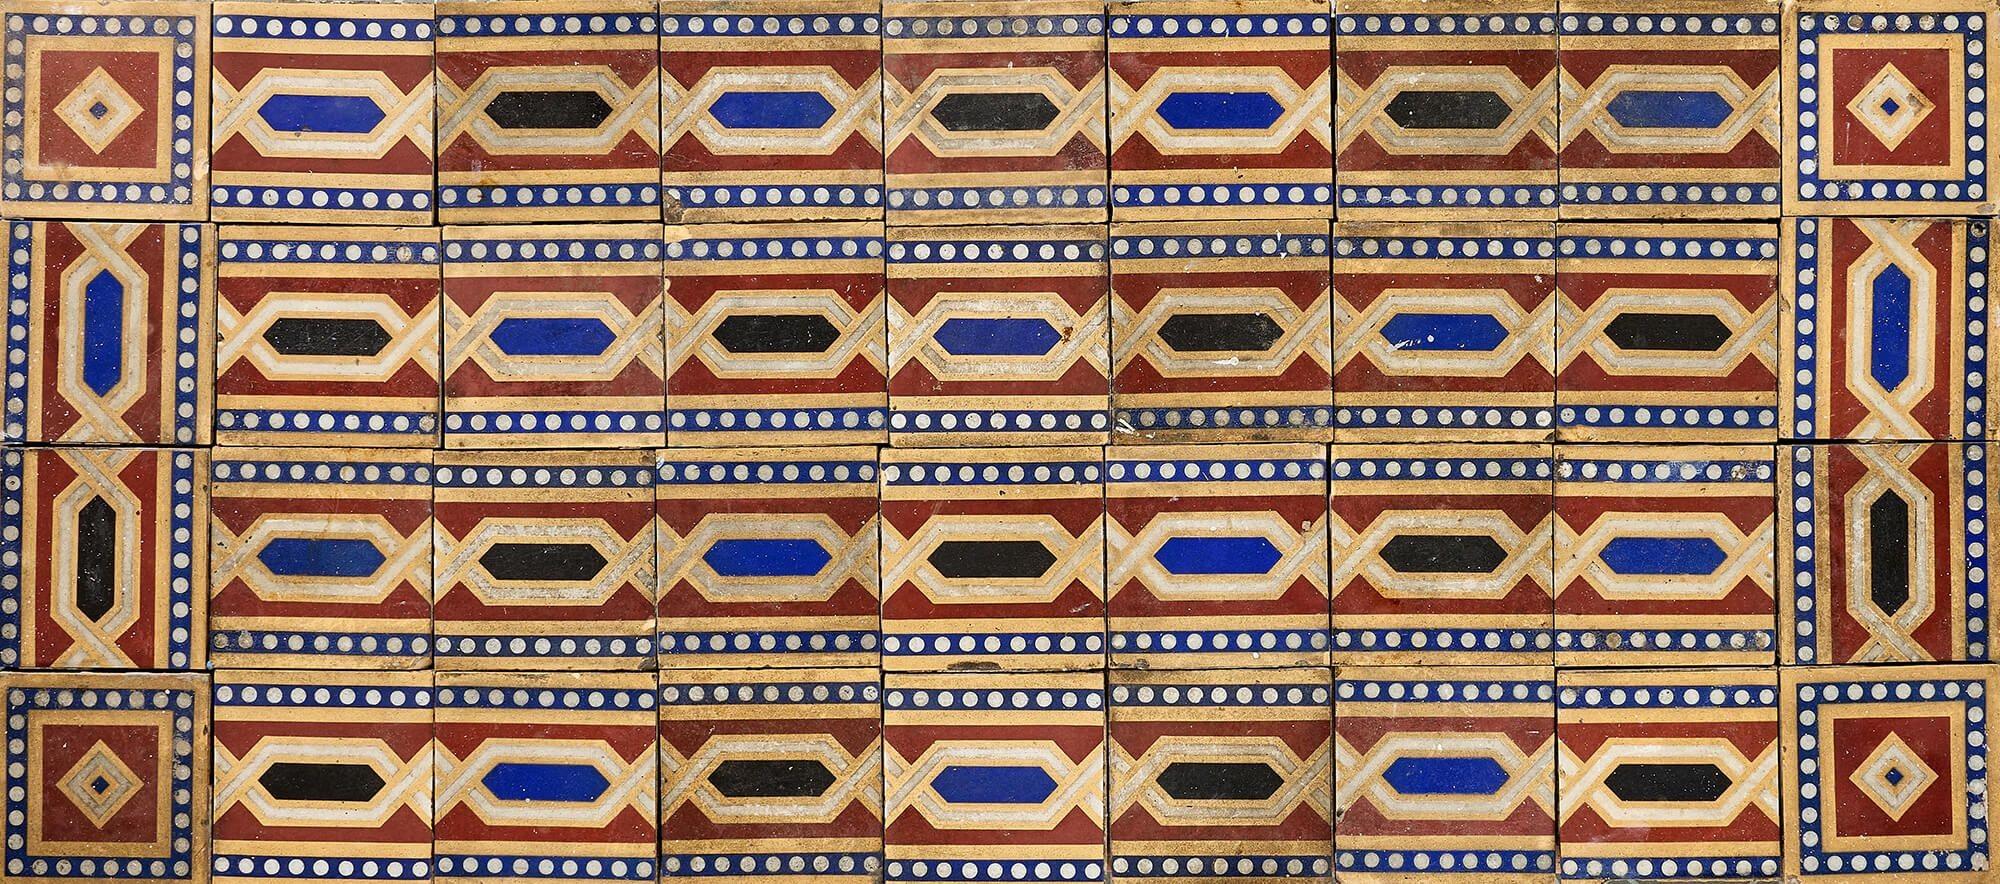 A 36-piece set of 6-inch tiles by W. Godwin of Lugwardine in Herefordshire UK, perfect for use as an antique tile splashback, porch floor or fireplace hearth. Dating from the 19th century, these antique tiles together form an eye-catching geometric